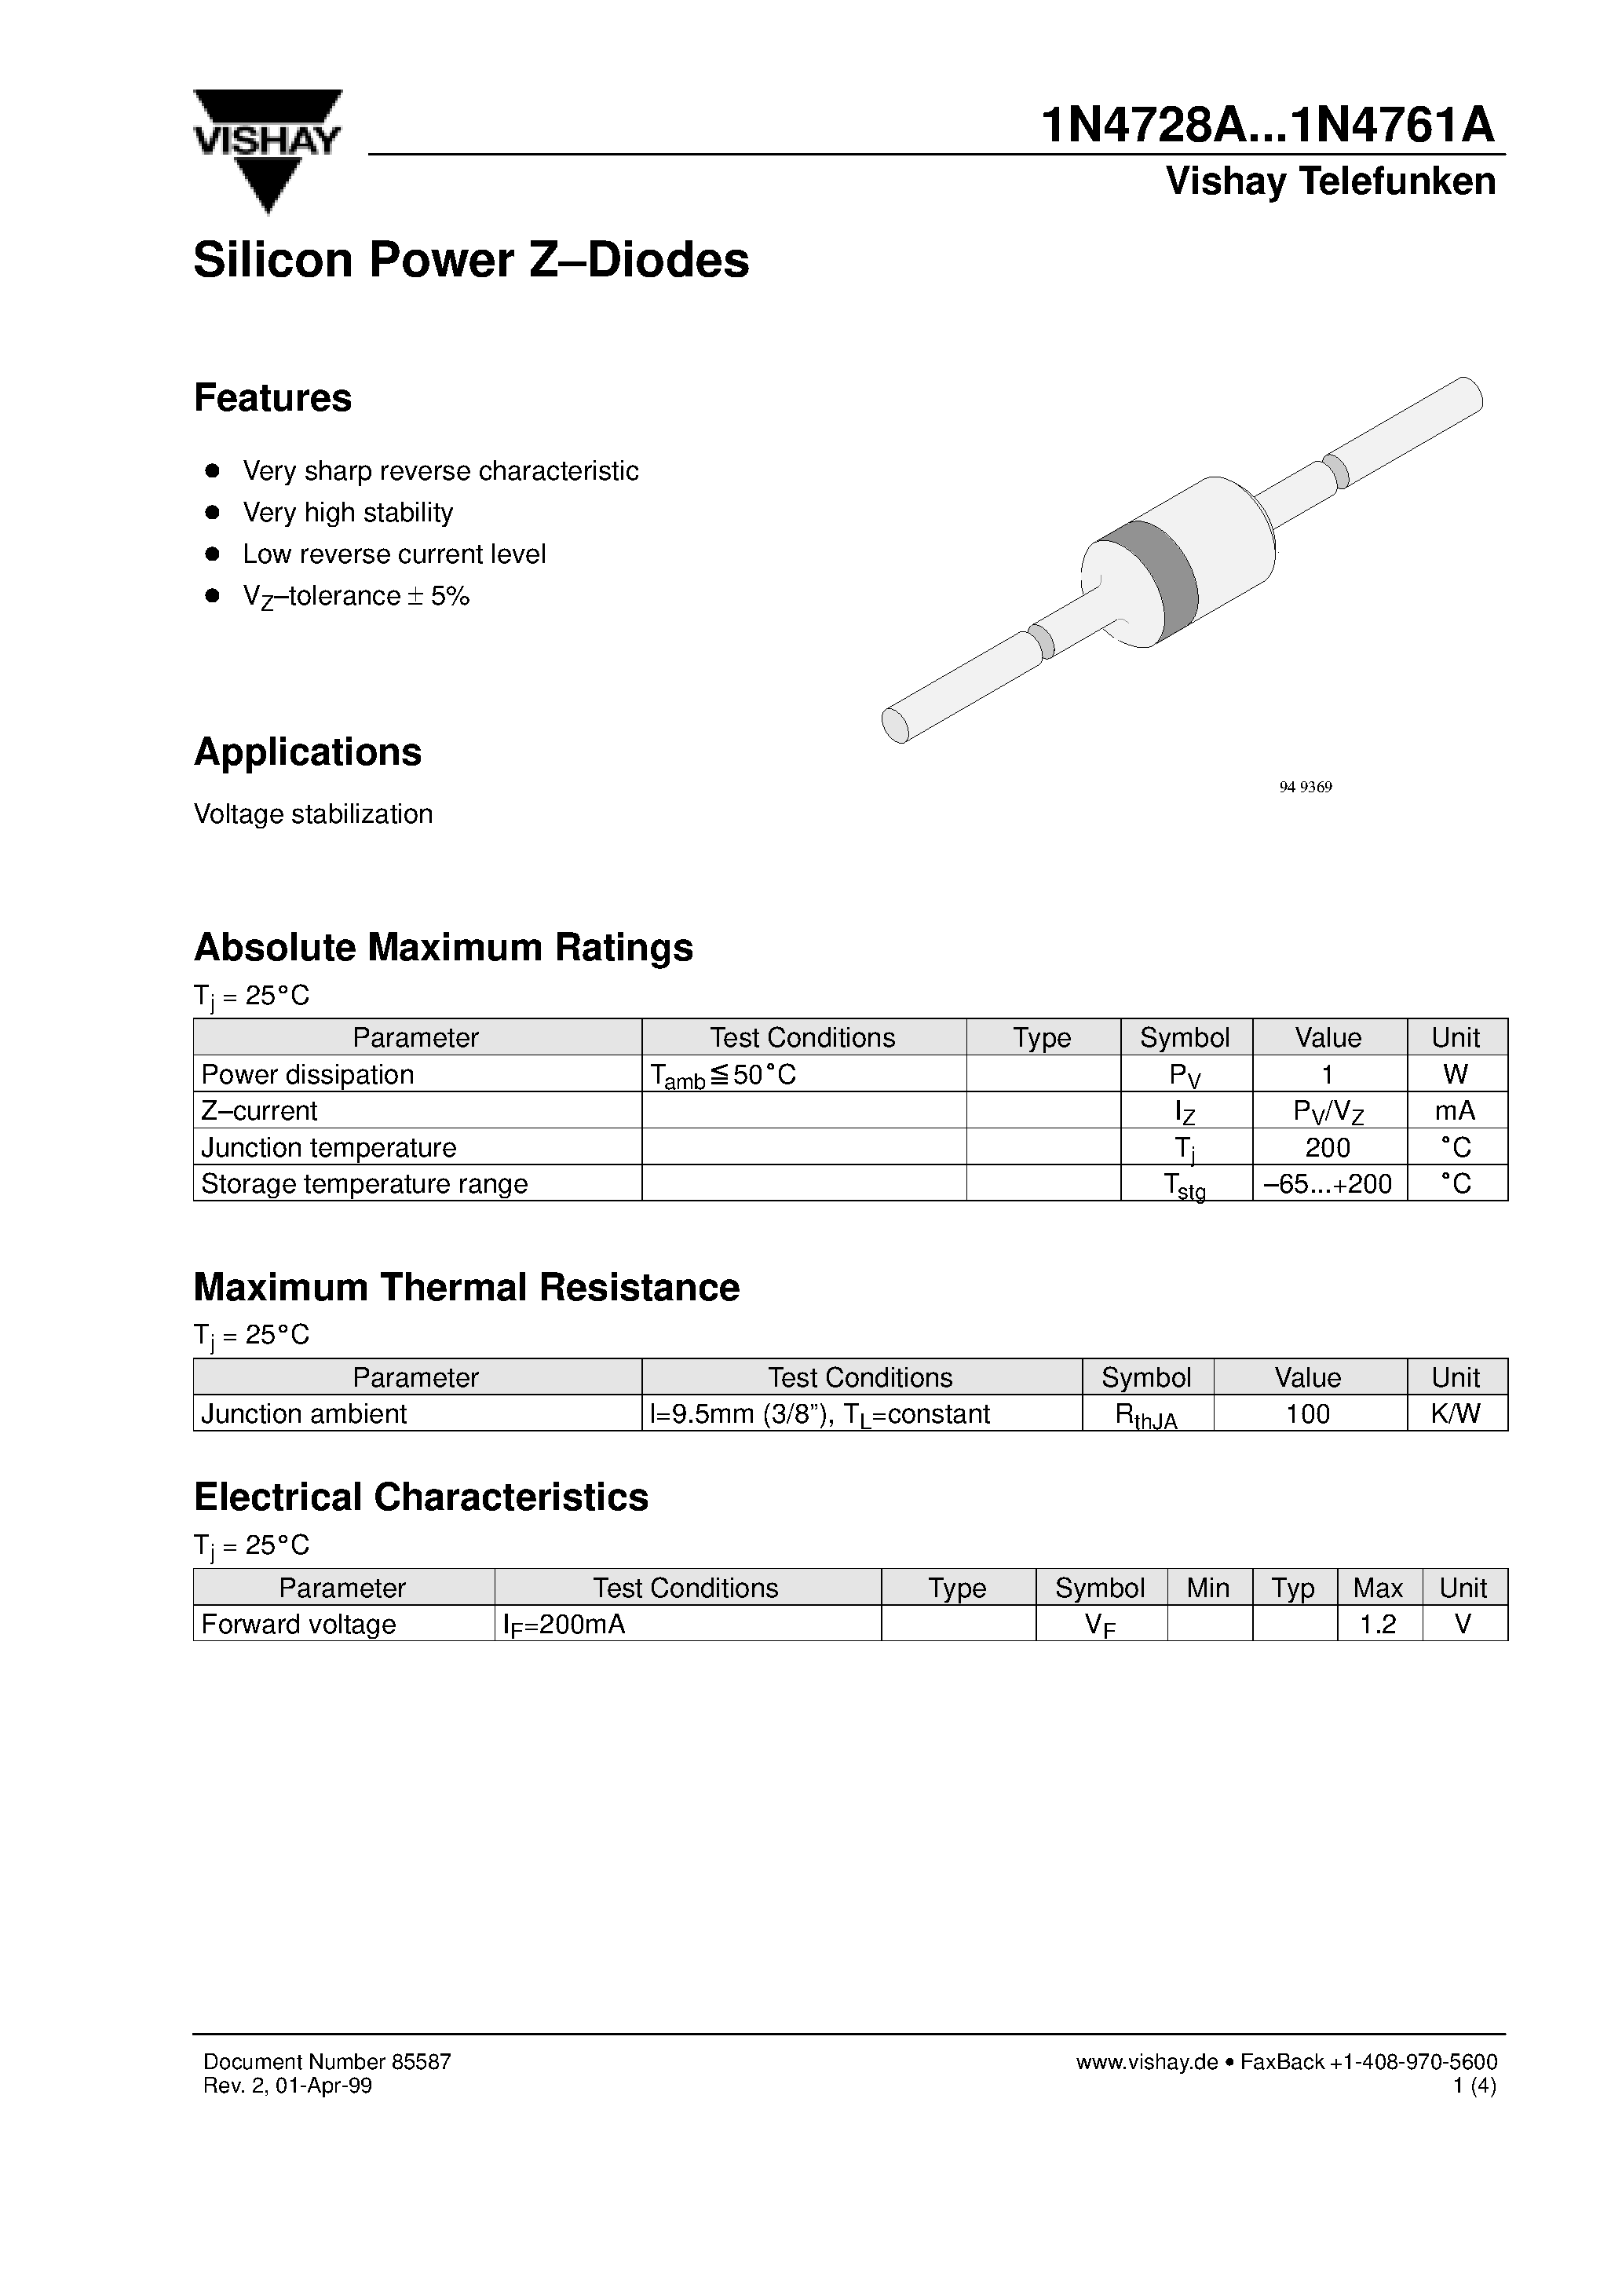 Datasheet 1N4729A - Silicon Power Z-Diodes page 1